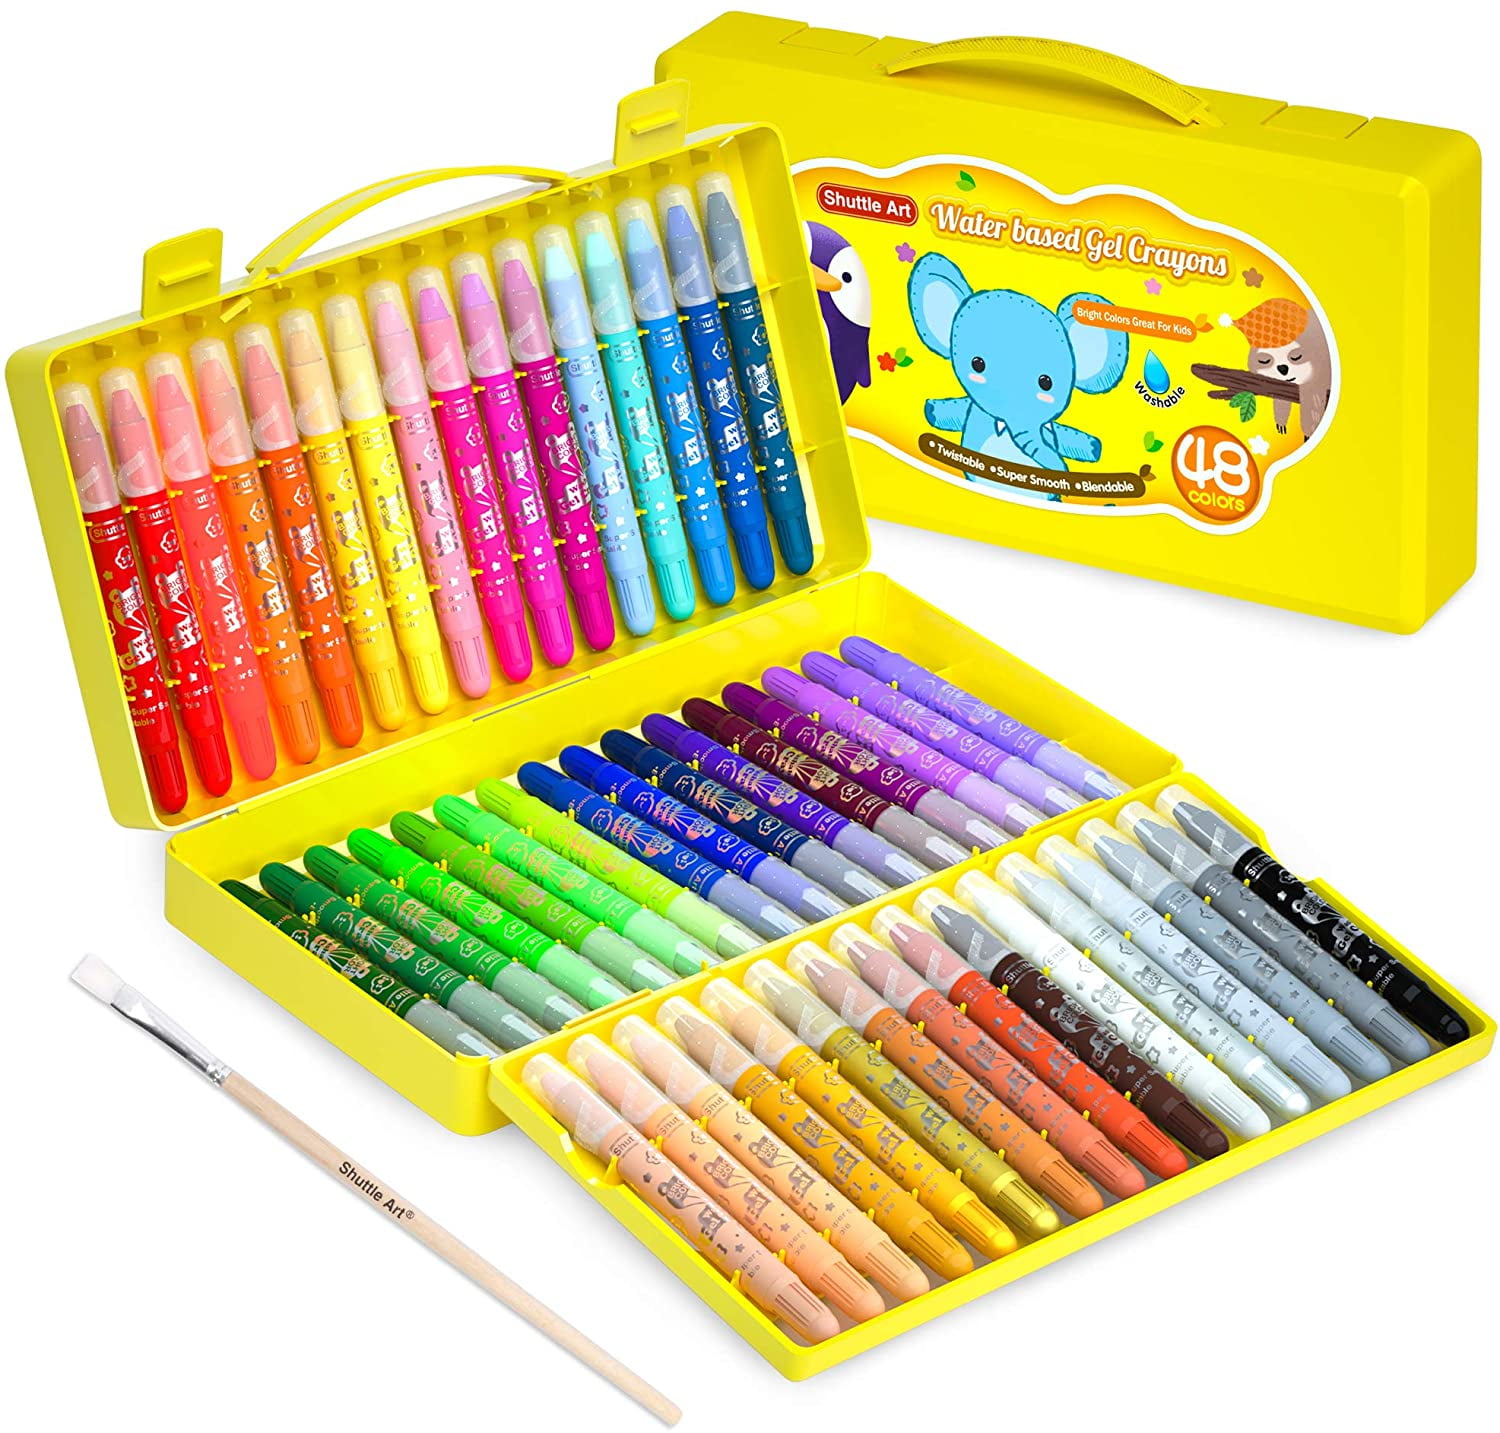 Arteza Kids Gel Crayons, 36 Count, Twistable and Washable Jumbo Crayons,  School Supplies for Classrooms, Students, and Teachers